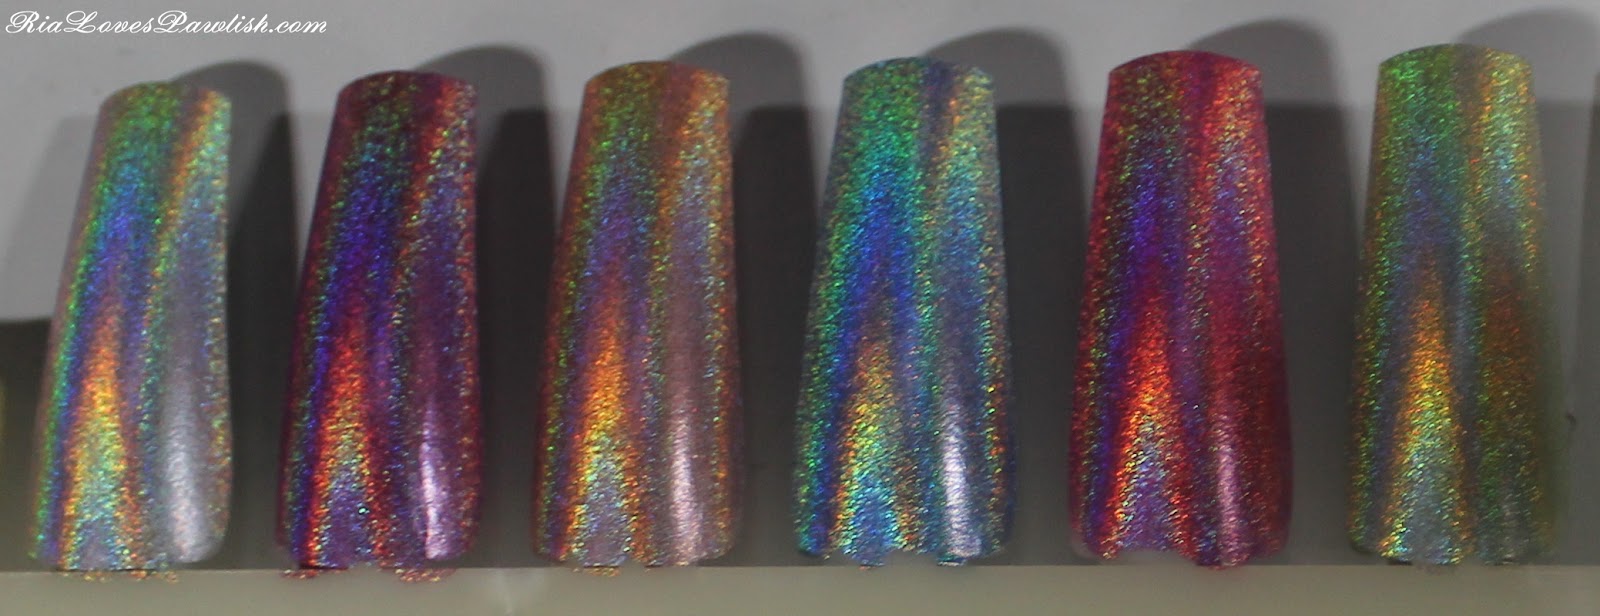 Color Club Holographic Nail Polish in Pink Diamond - wide 3